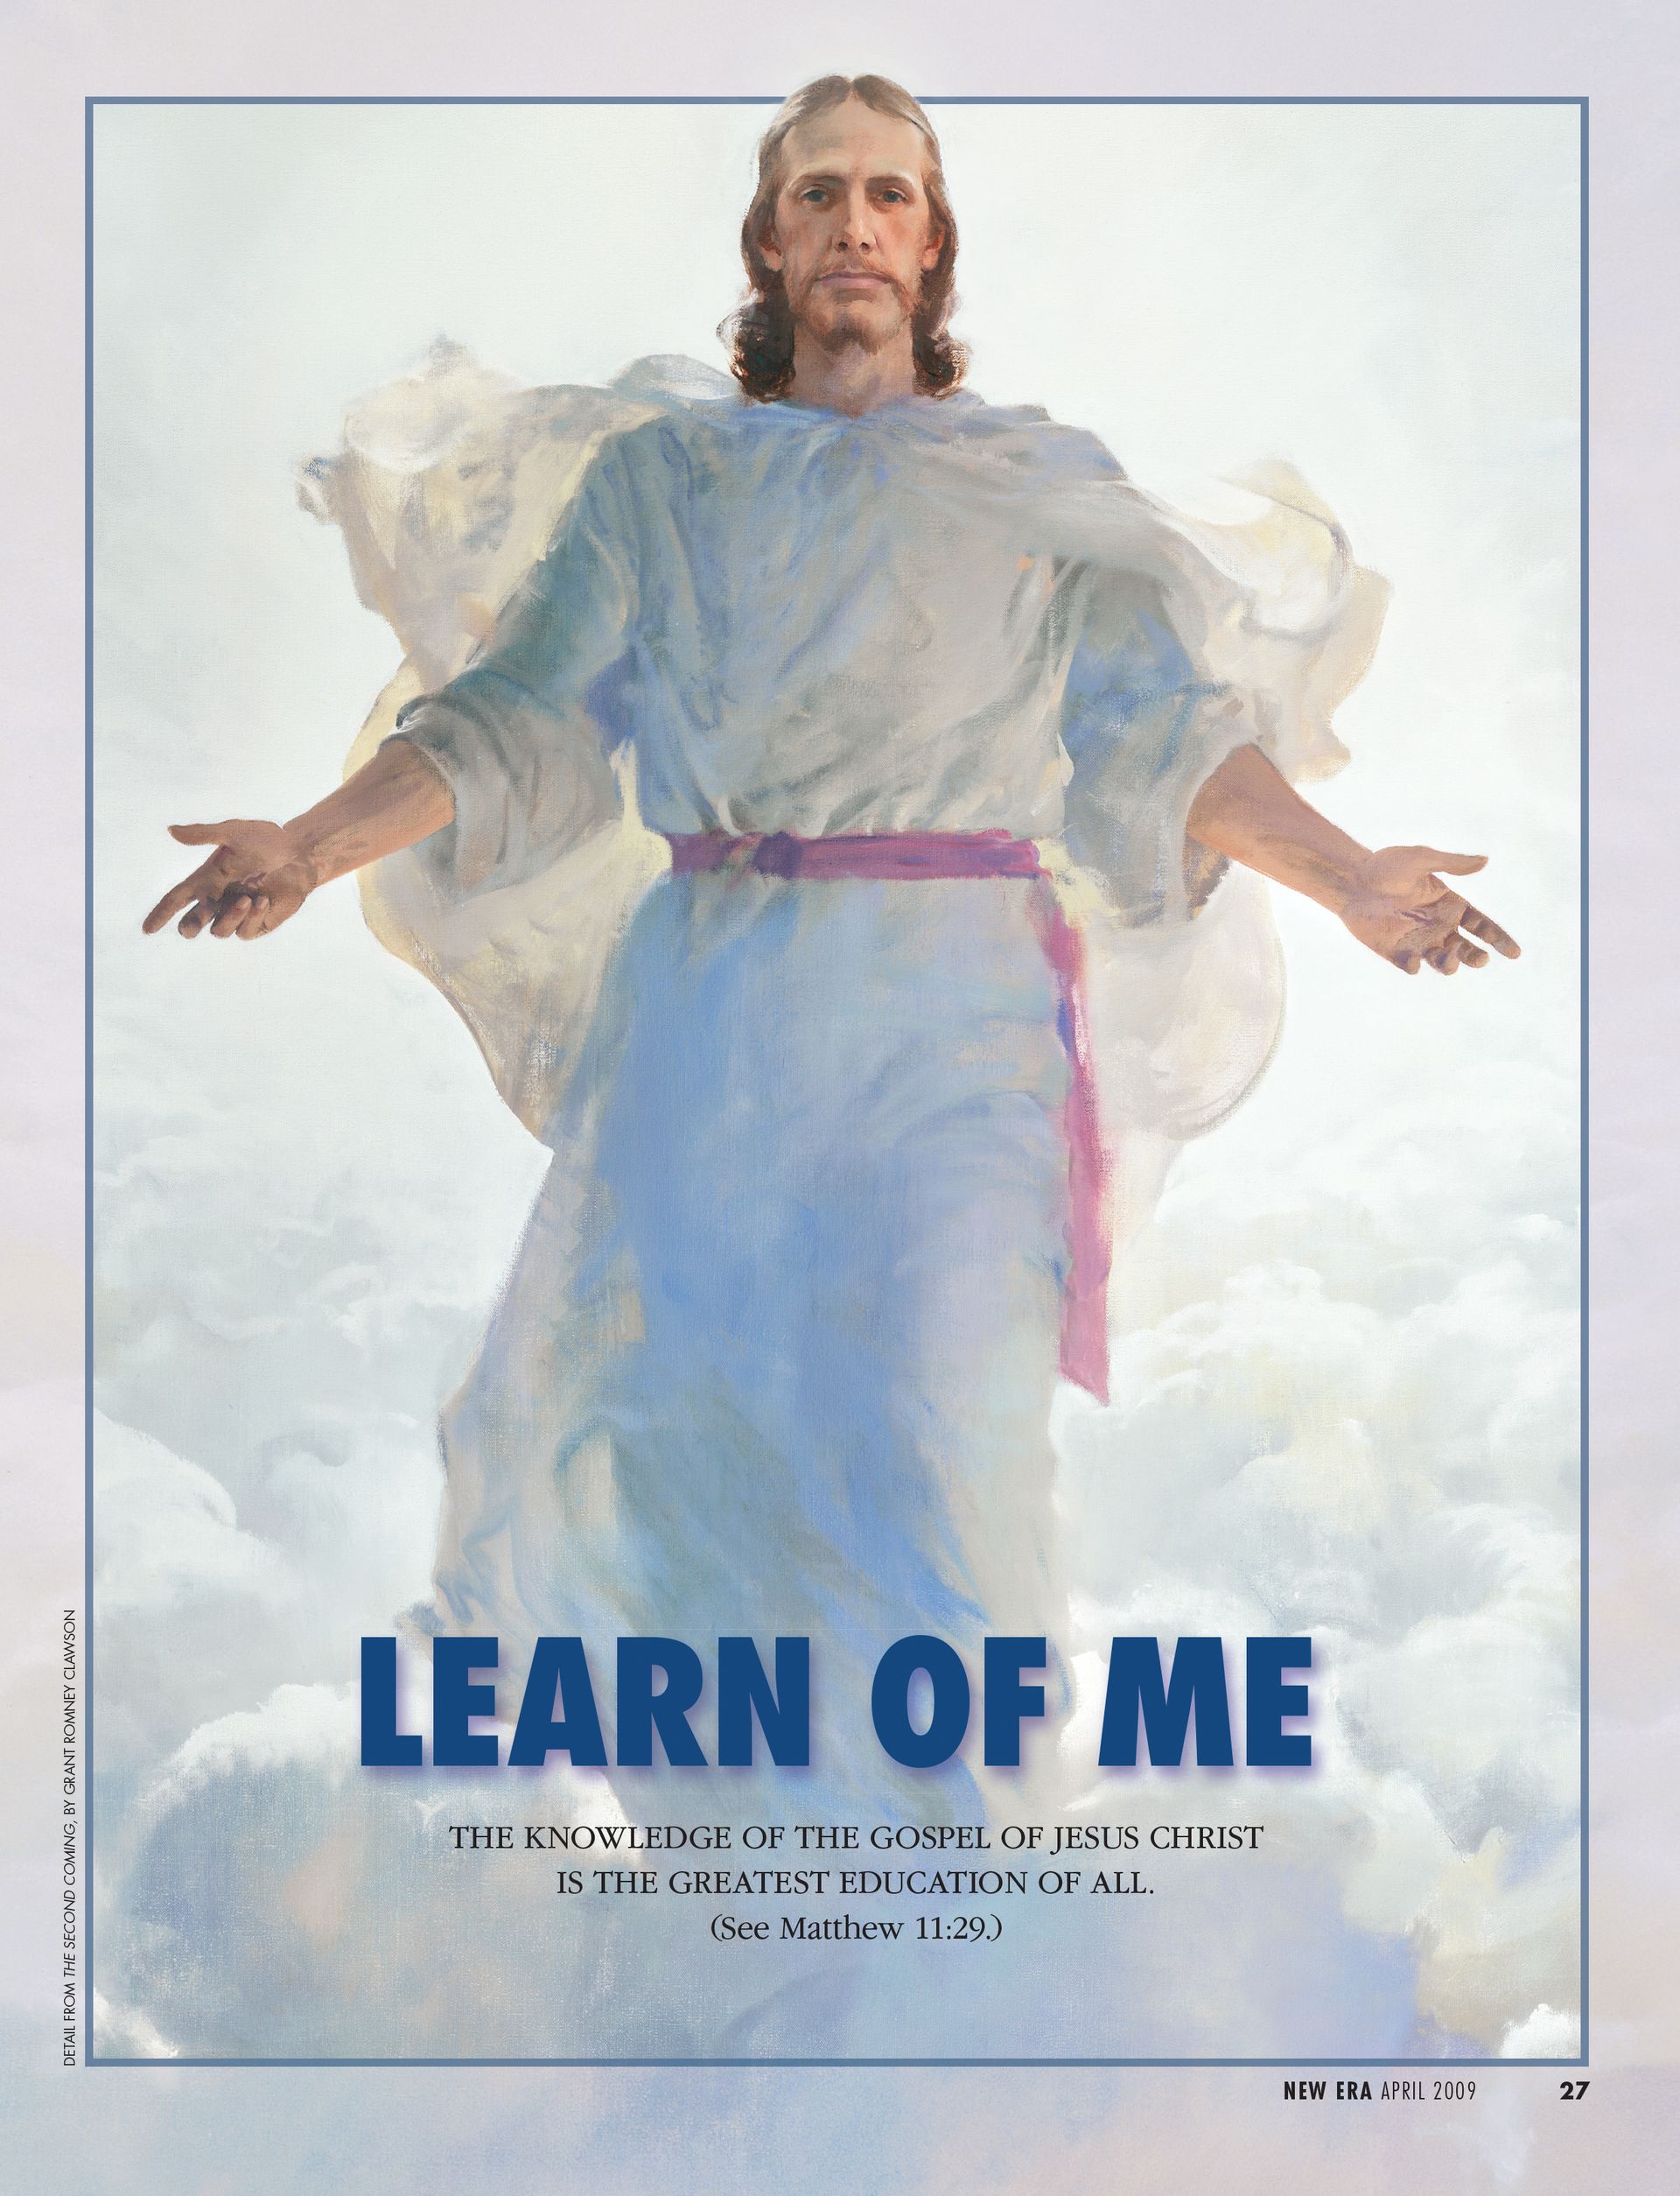 Learn of Me. The knowledge of the gospel of Jesus Christ is the greatest education of all. (See Matthew 11:29.) Apr. 2009 © undefined ipCode 1.